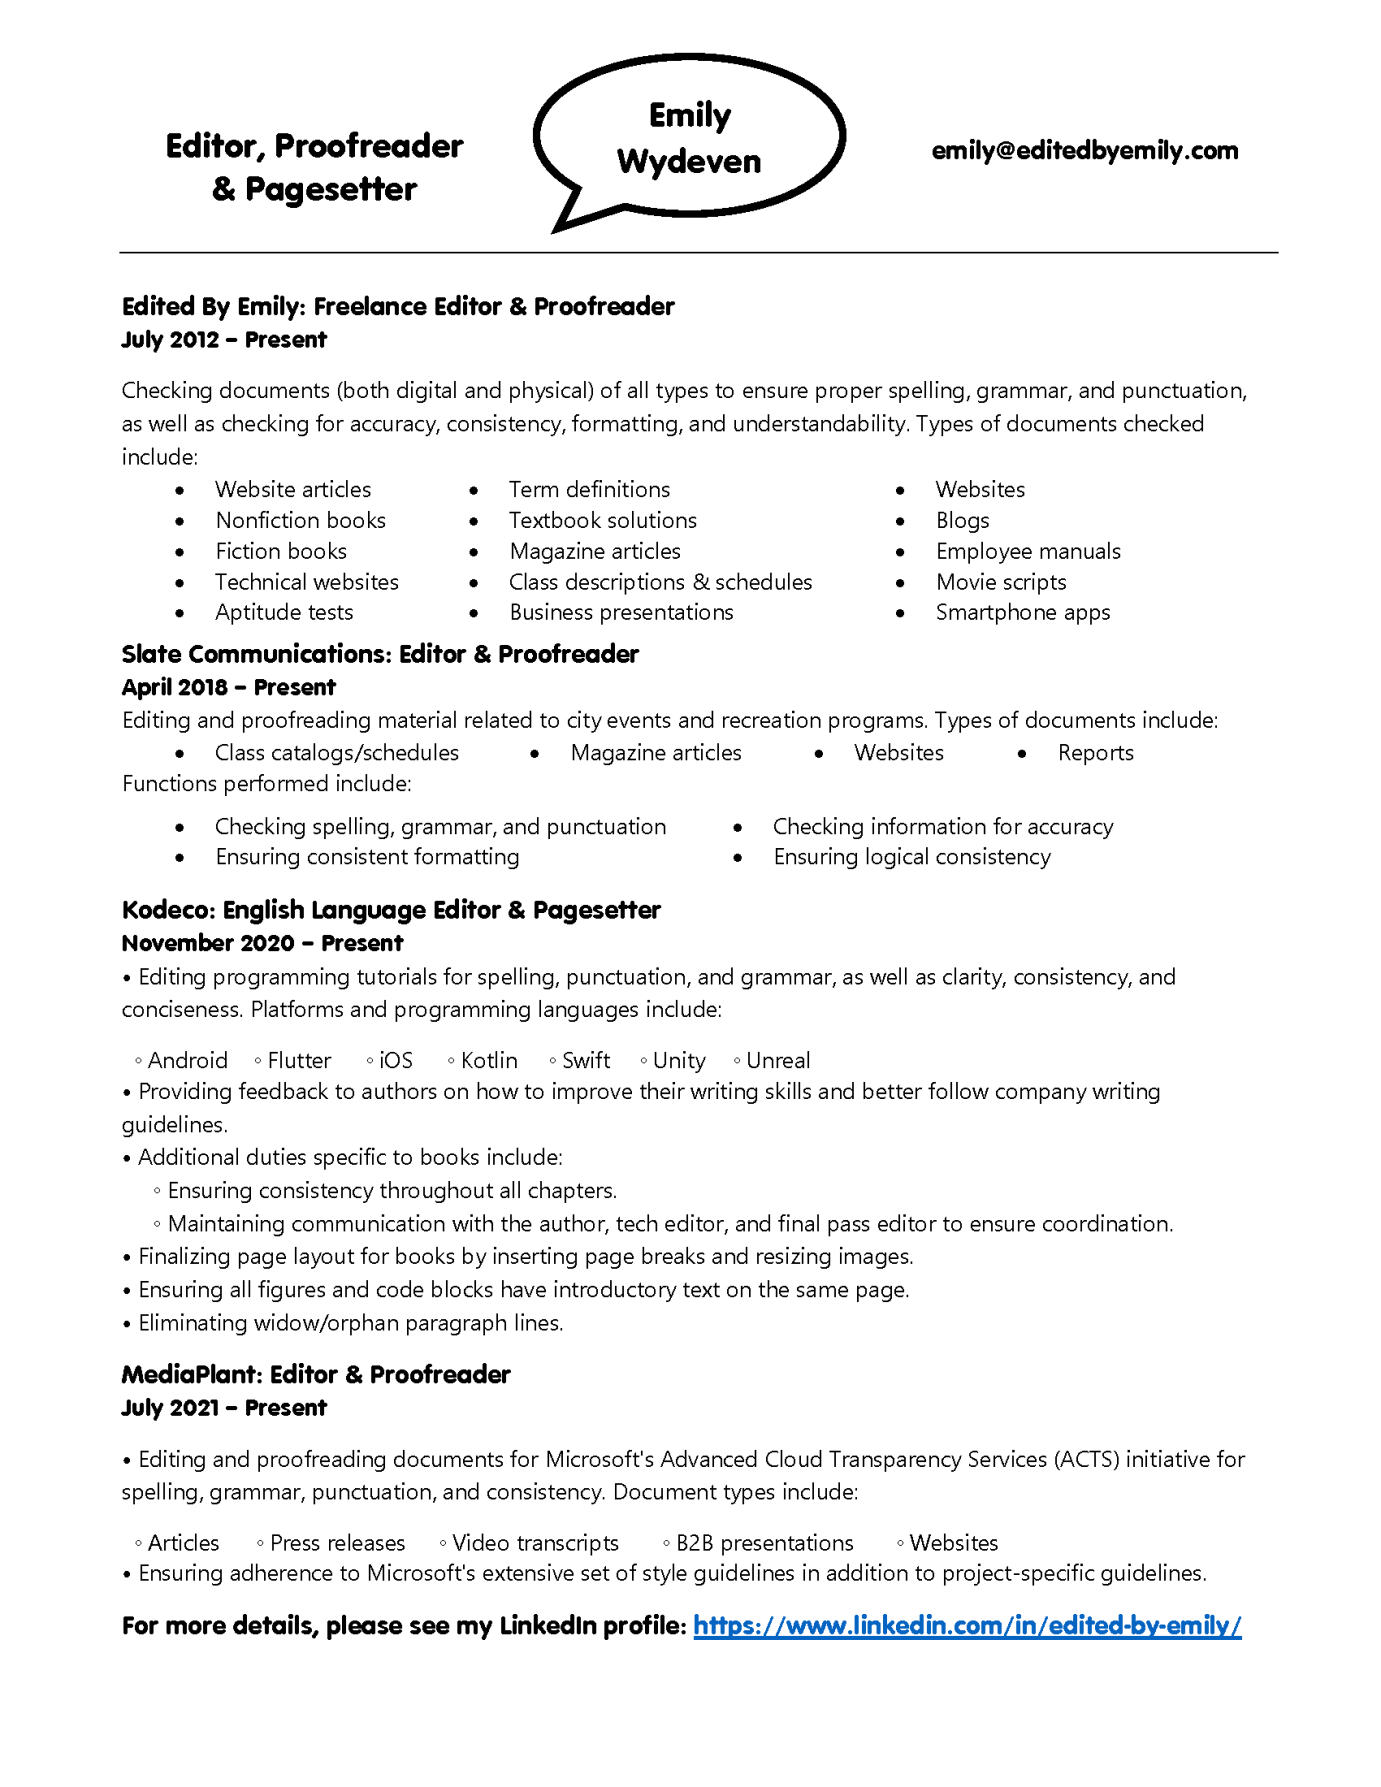 Emily Wydeven resume